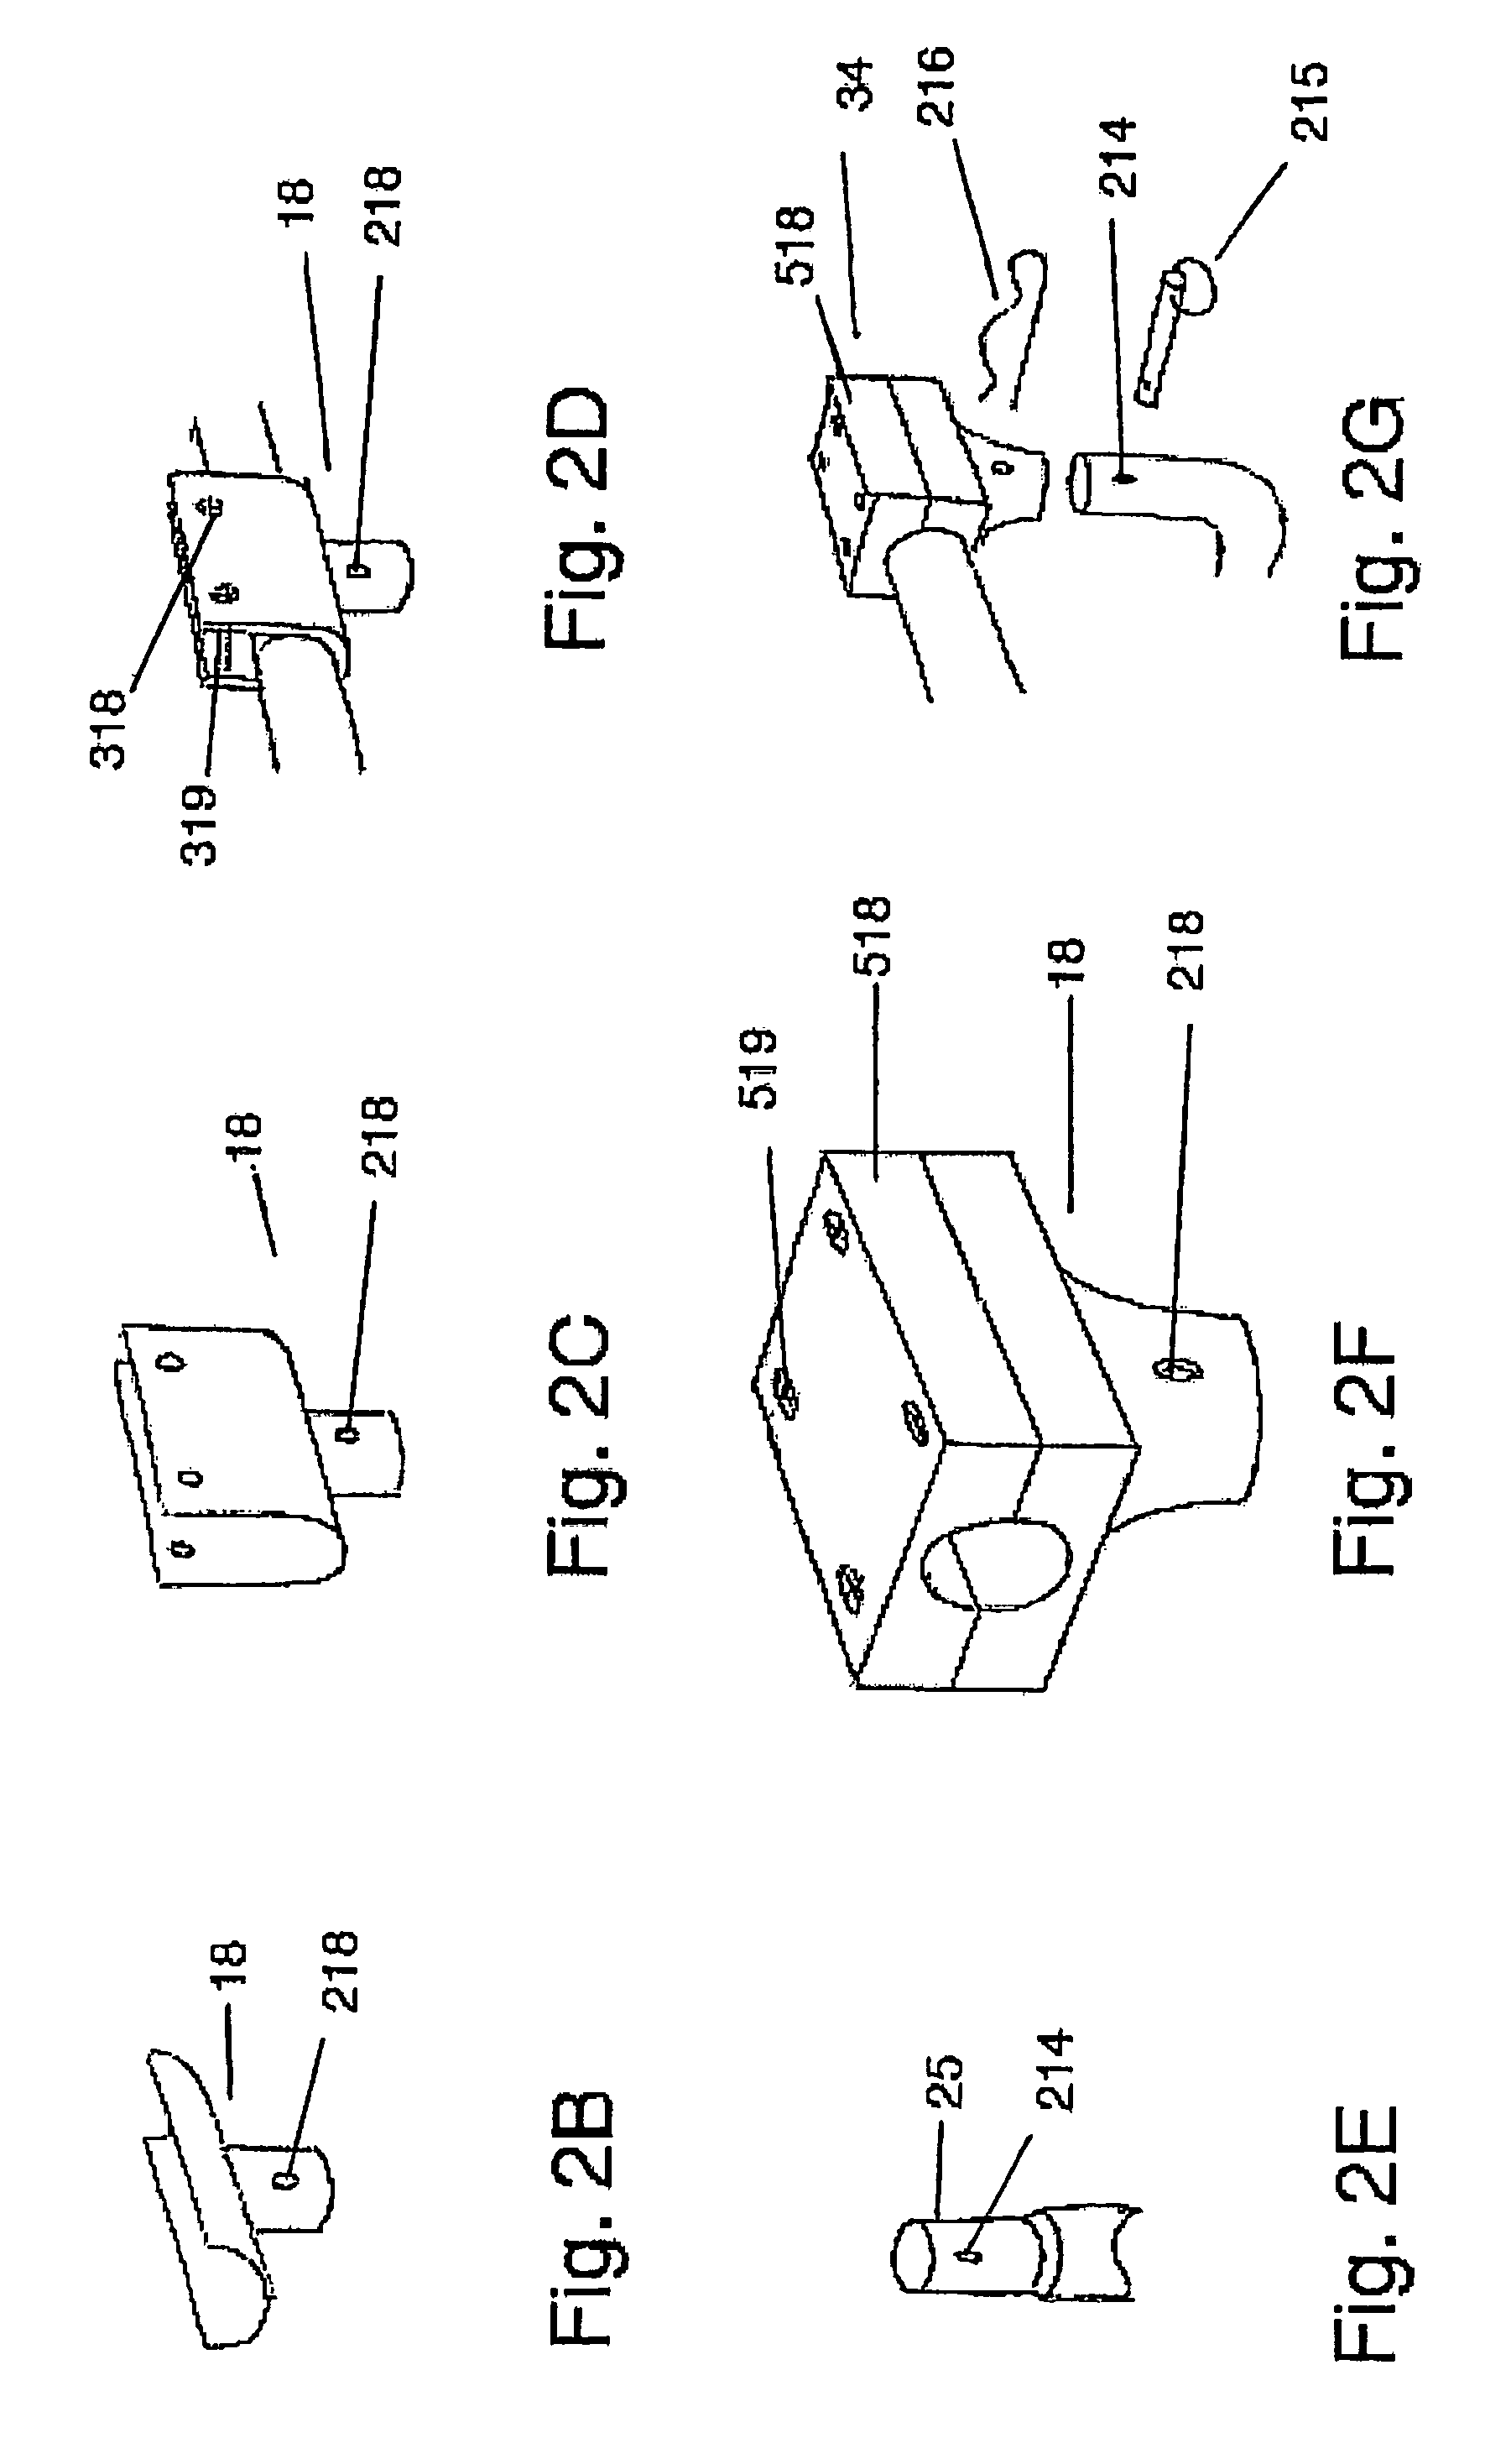 Motorized scooter wheelchair attachment device